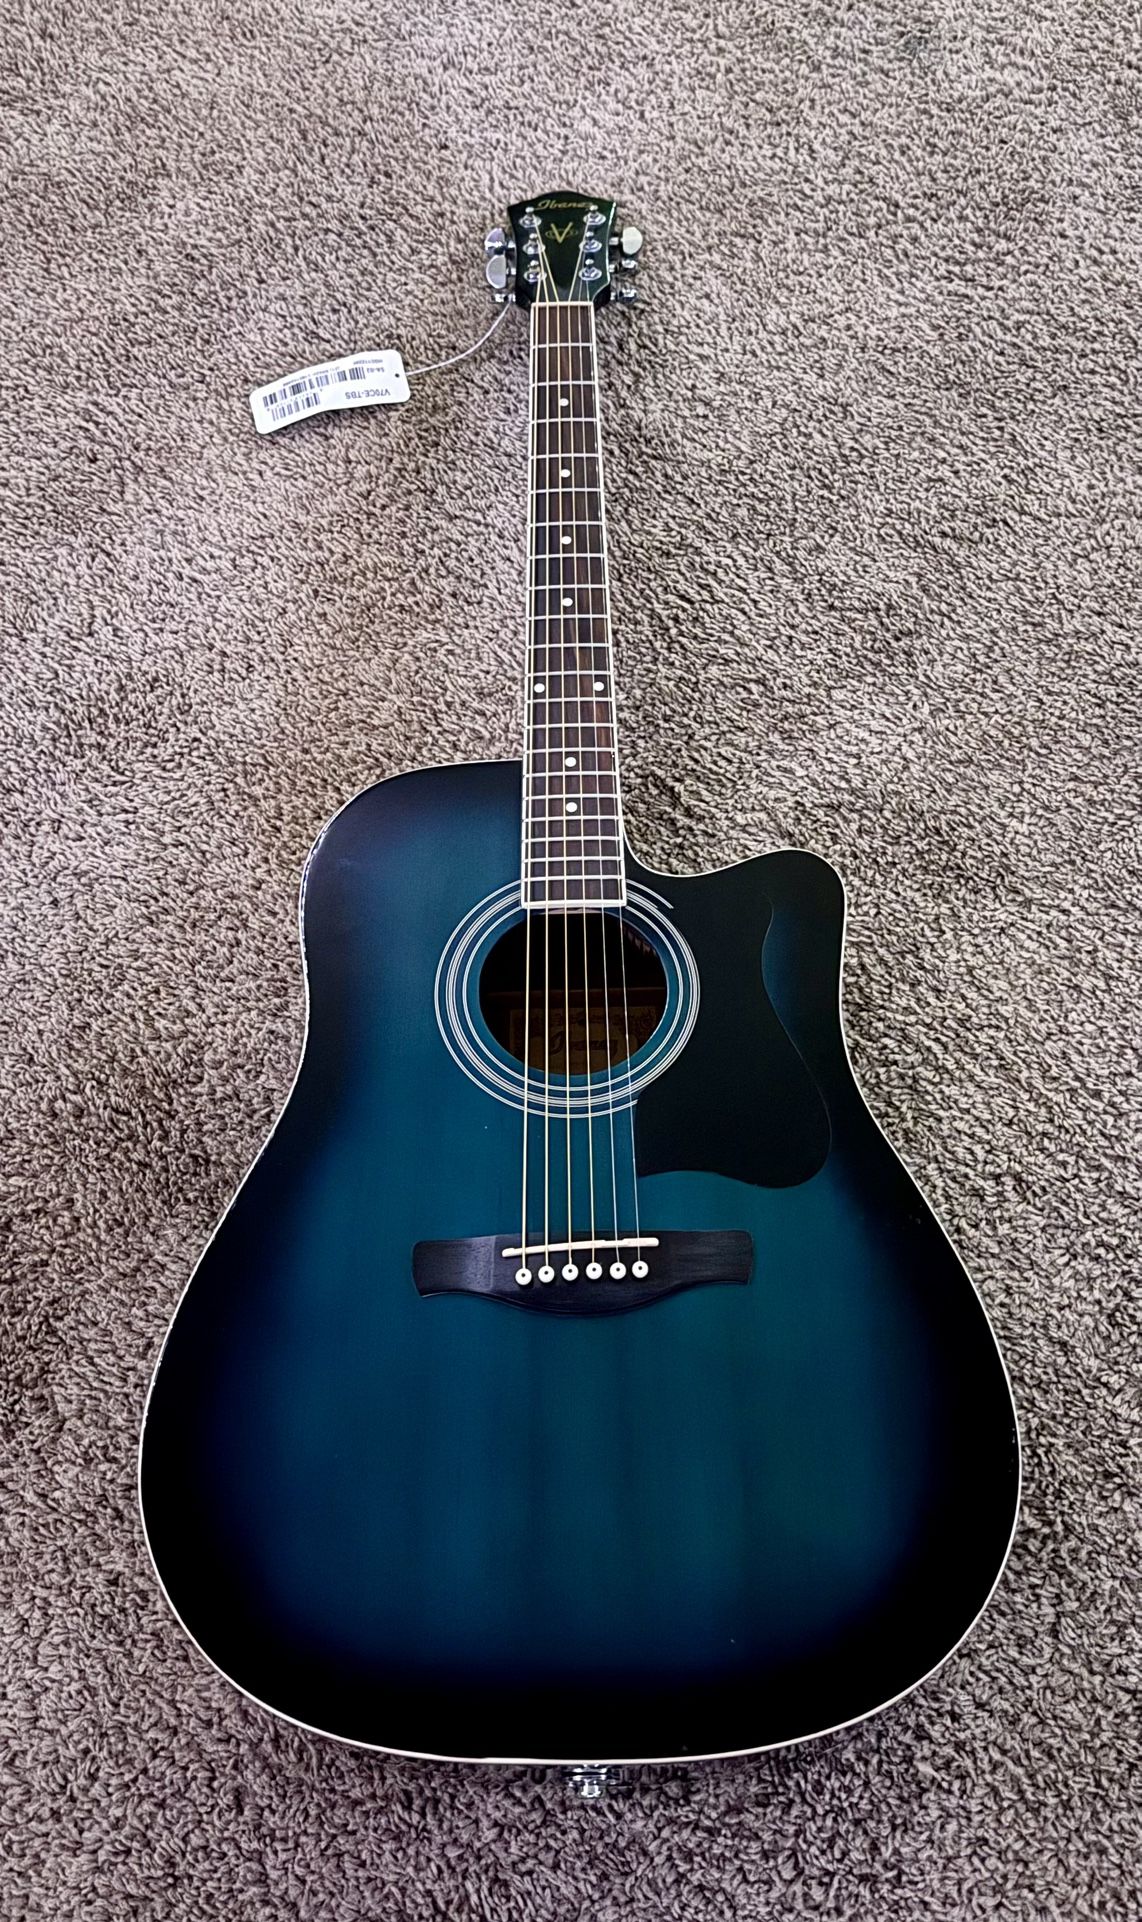 Guitar: Ibanez Acoustic Electric